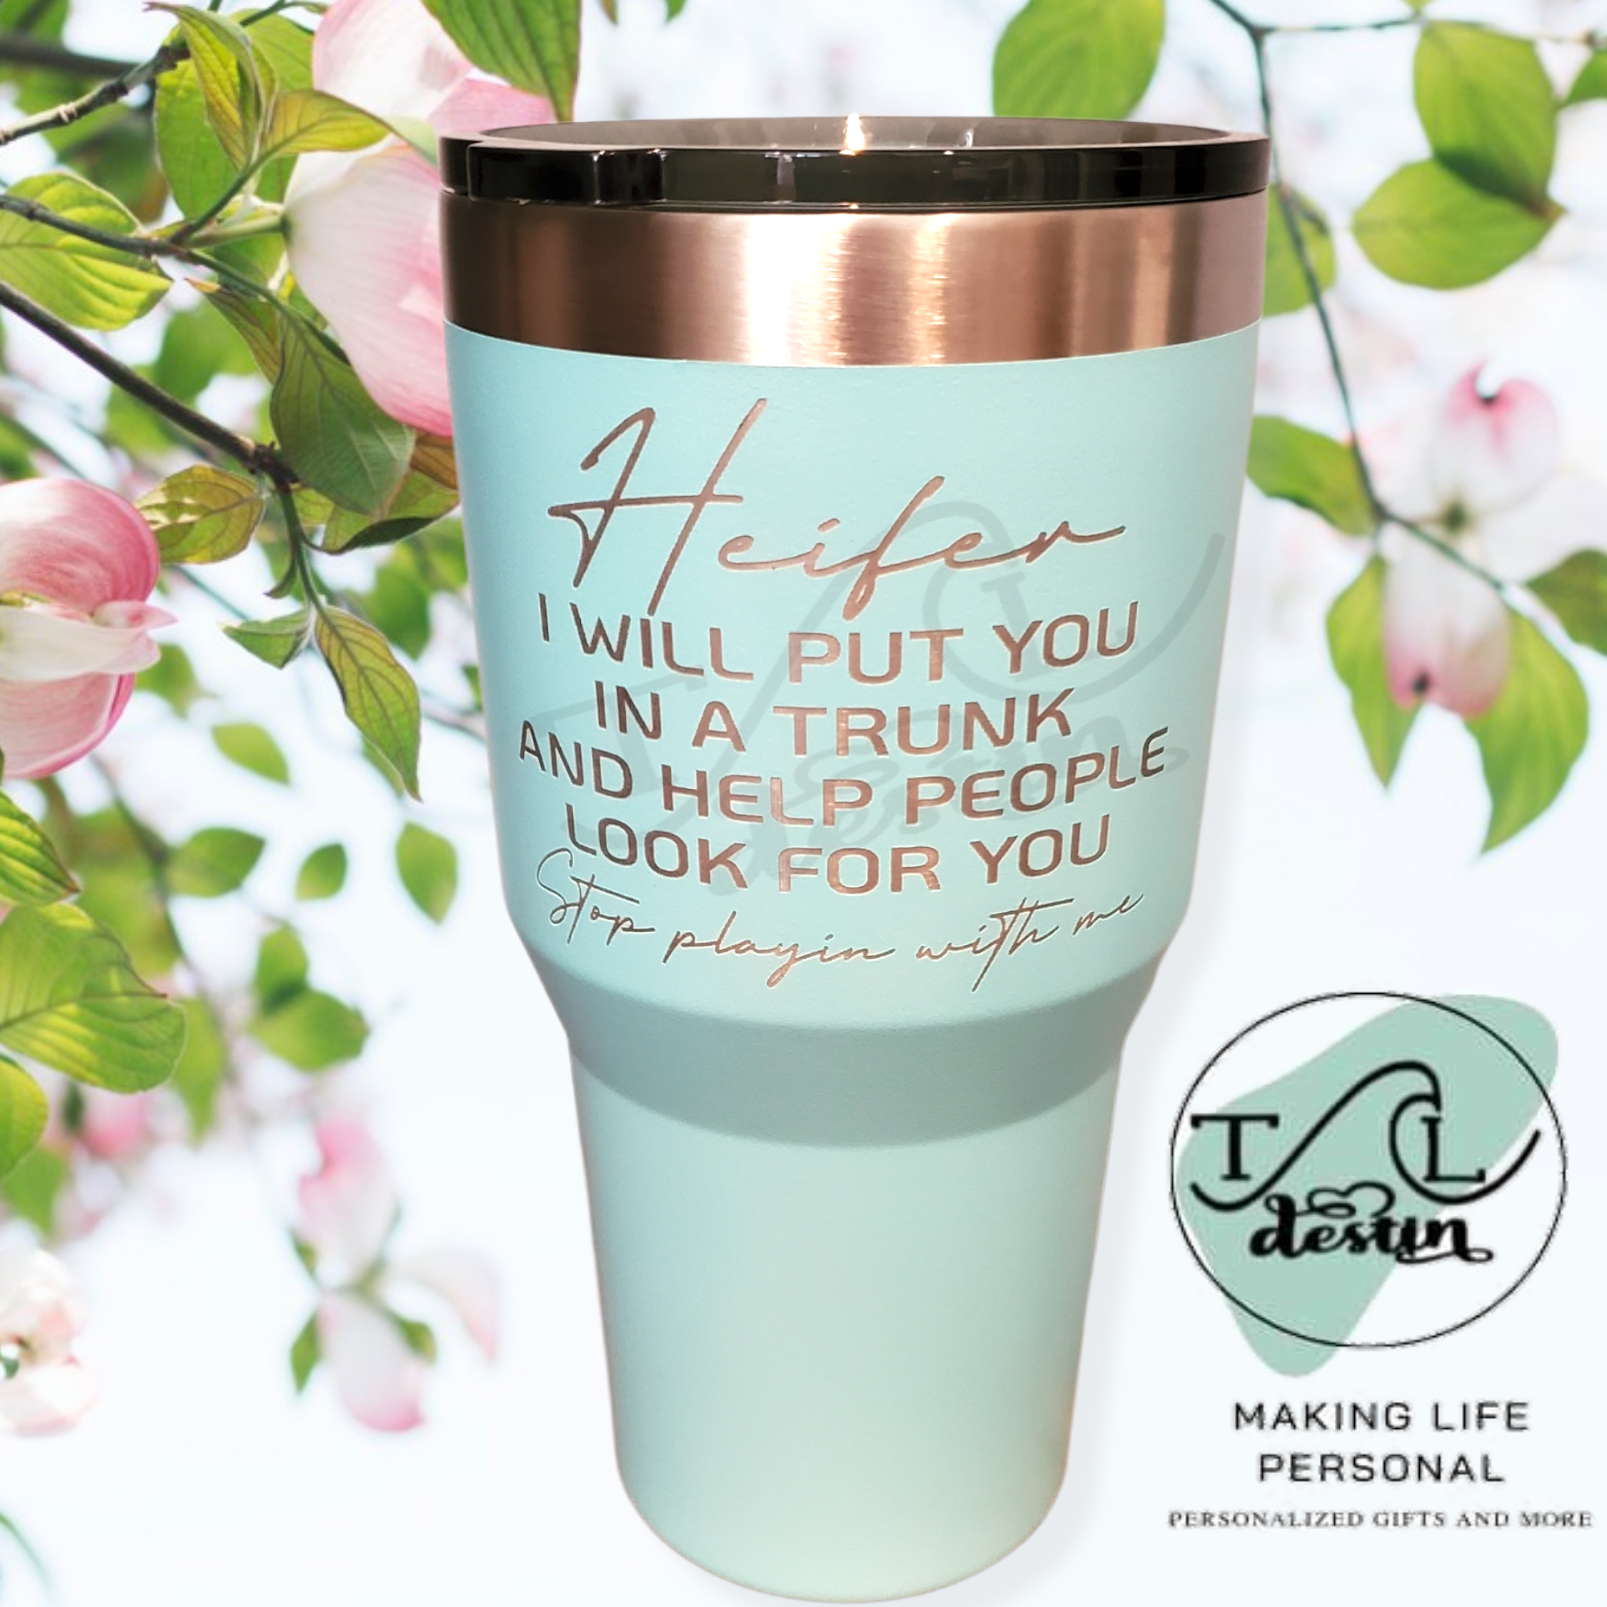 32 oz sea blue Tumbler. Laser engraved with quote "Heifer I will put you in a trunk and help people look for you" Snarky quote tumblers. Ozark brand with standard lid